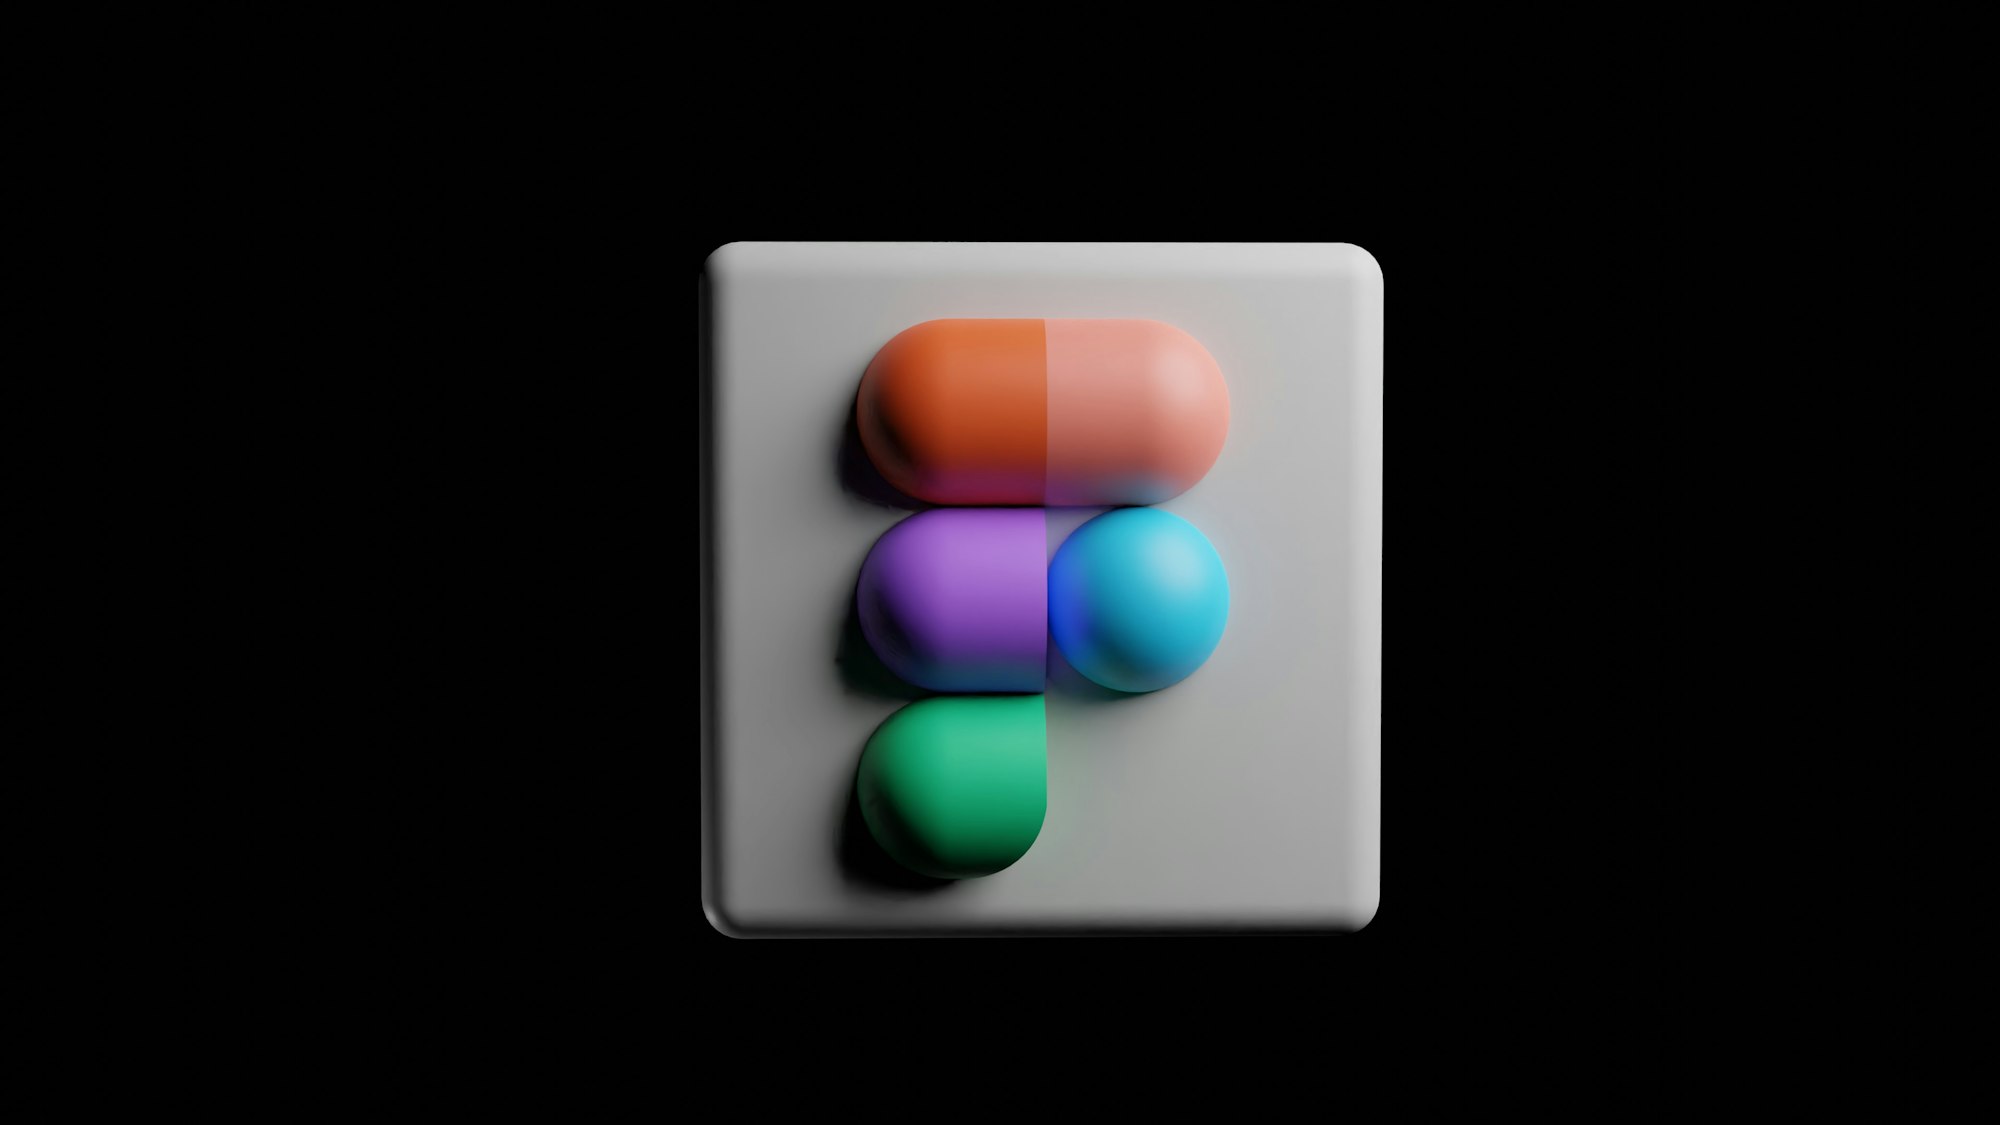 3d illustration of a Figma icon